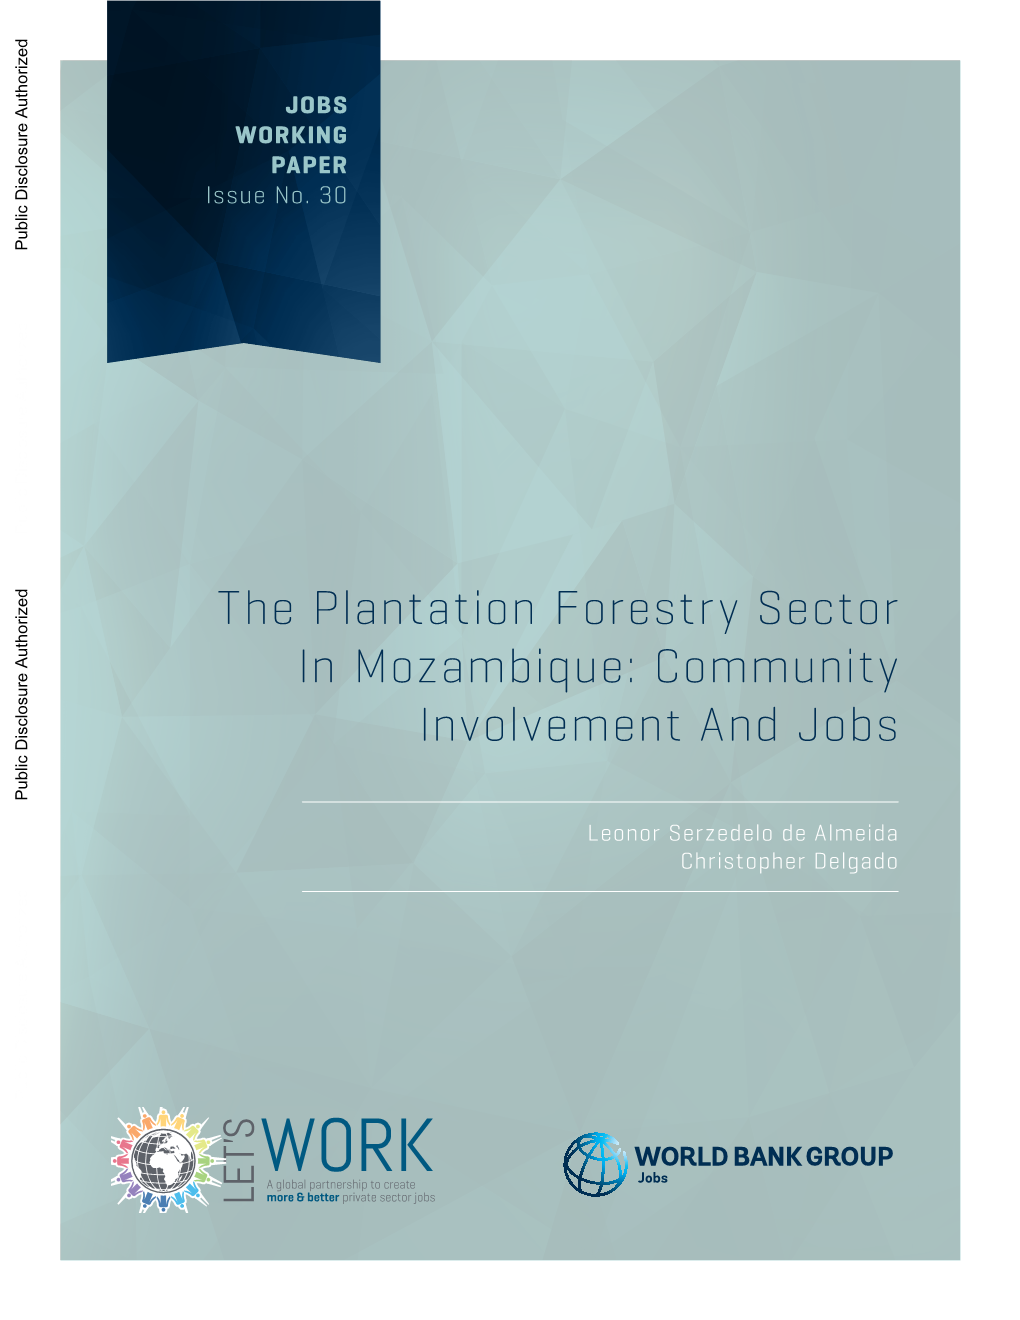 The-Plantation-Forestry-Sector-In-Mozambique-Community-Involvement-And-Jobs.Pdf